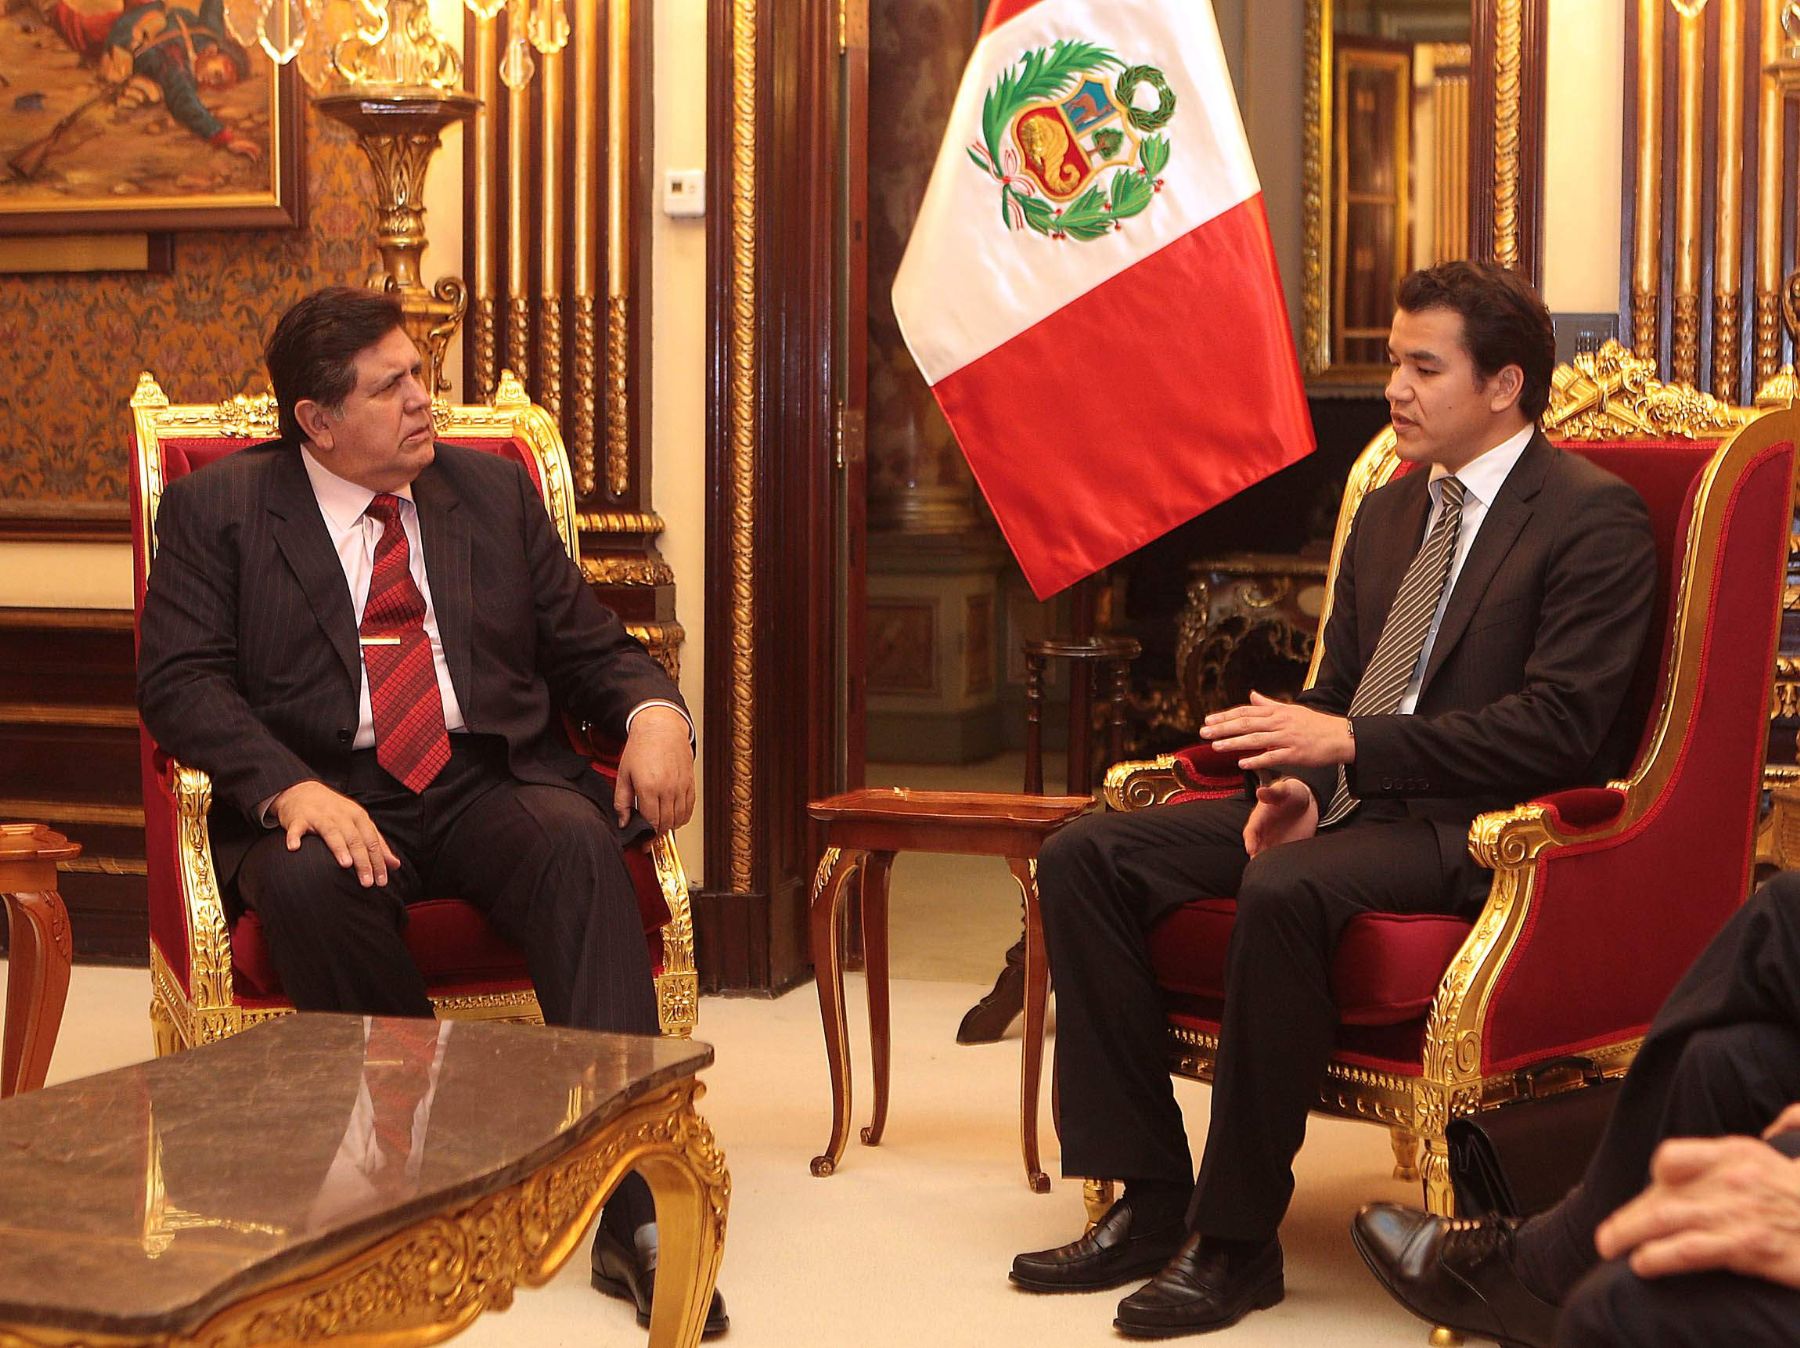 Peruvian President Alan Garcia Perez met Friday morning with Perenco Group’s chairman Francois Perrodo and general manager Daniel Kadjar at the Government Palace in Lima. Photo: Sepres.